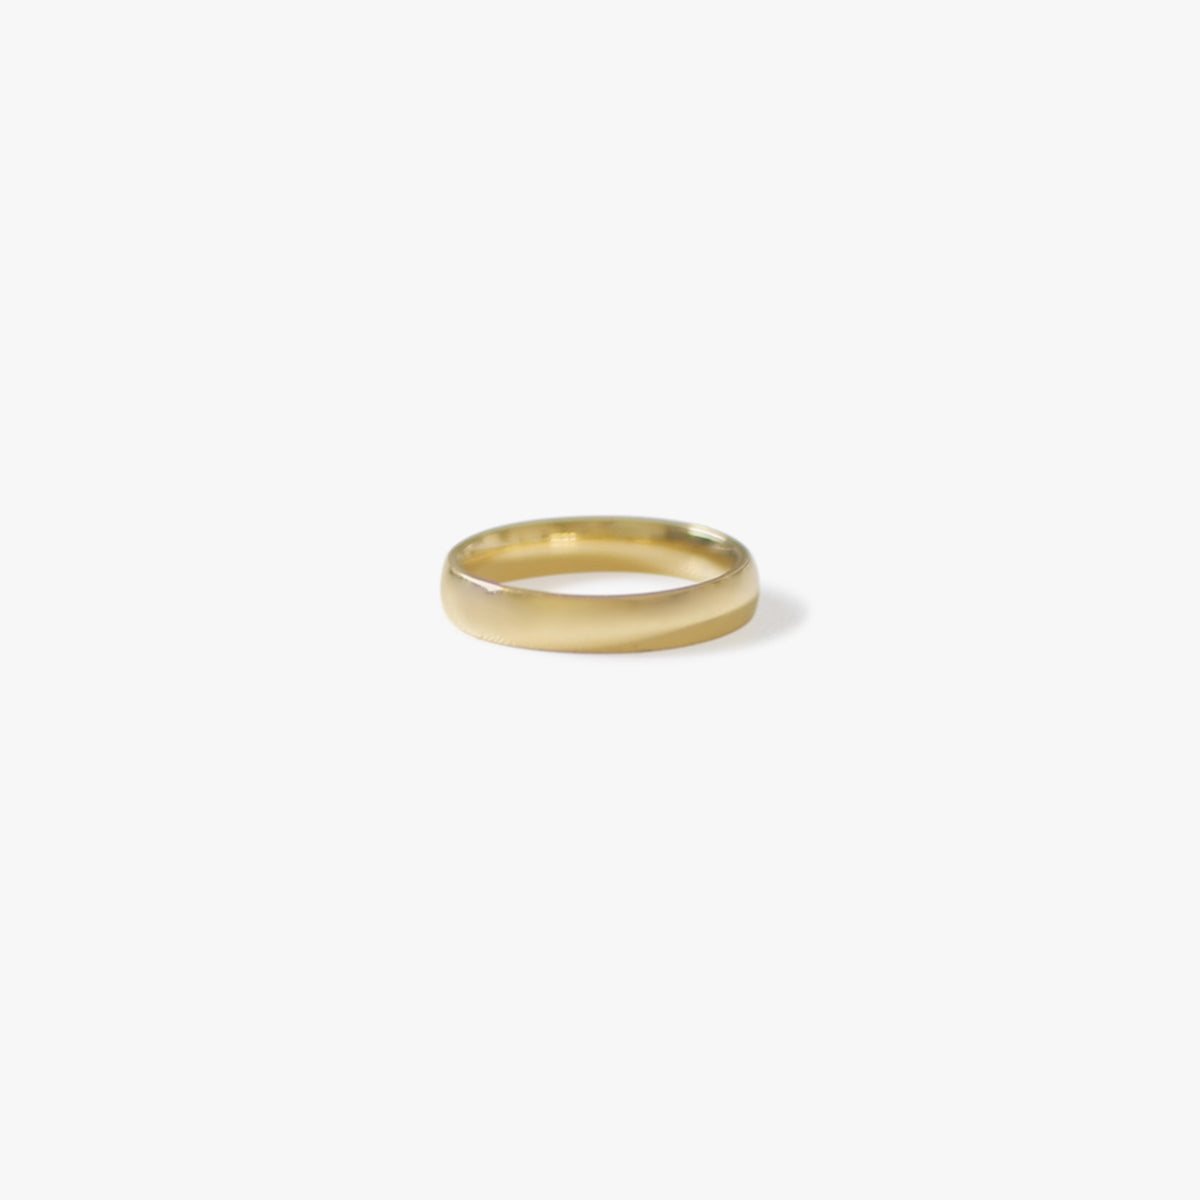 The Dainty 4mm Band